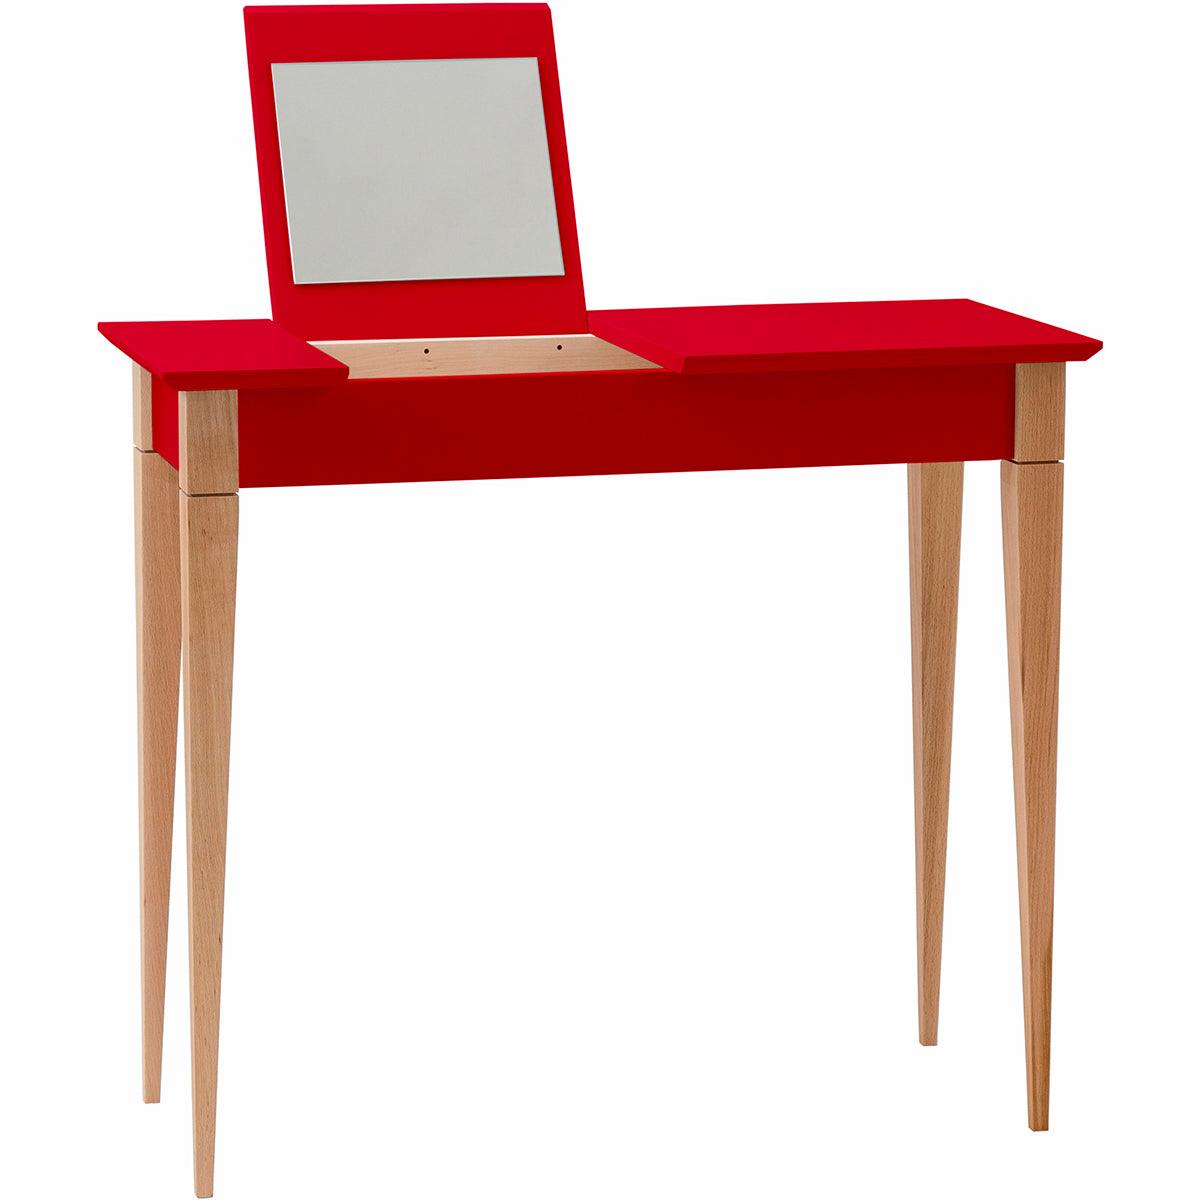 Mimo Dressing Table with Mirror - WOO .Design